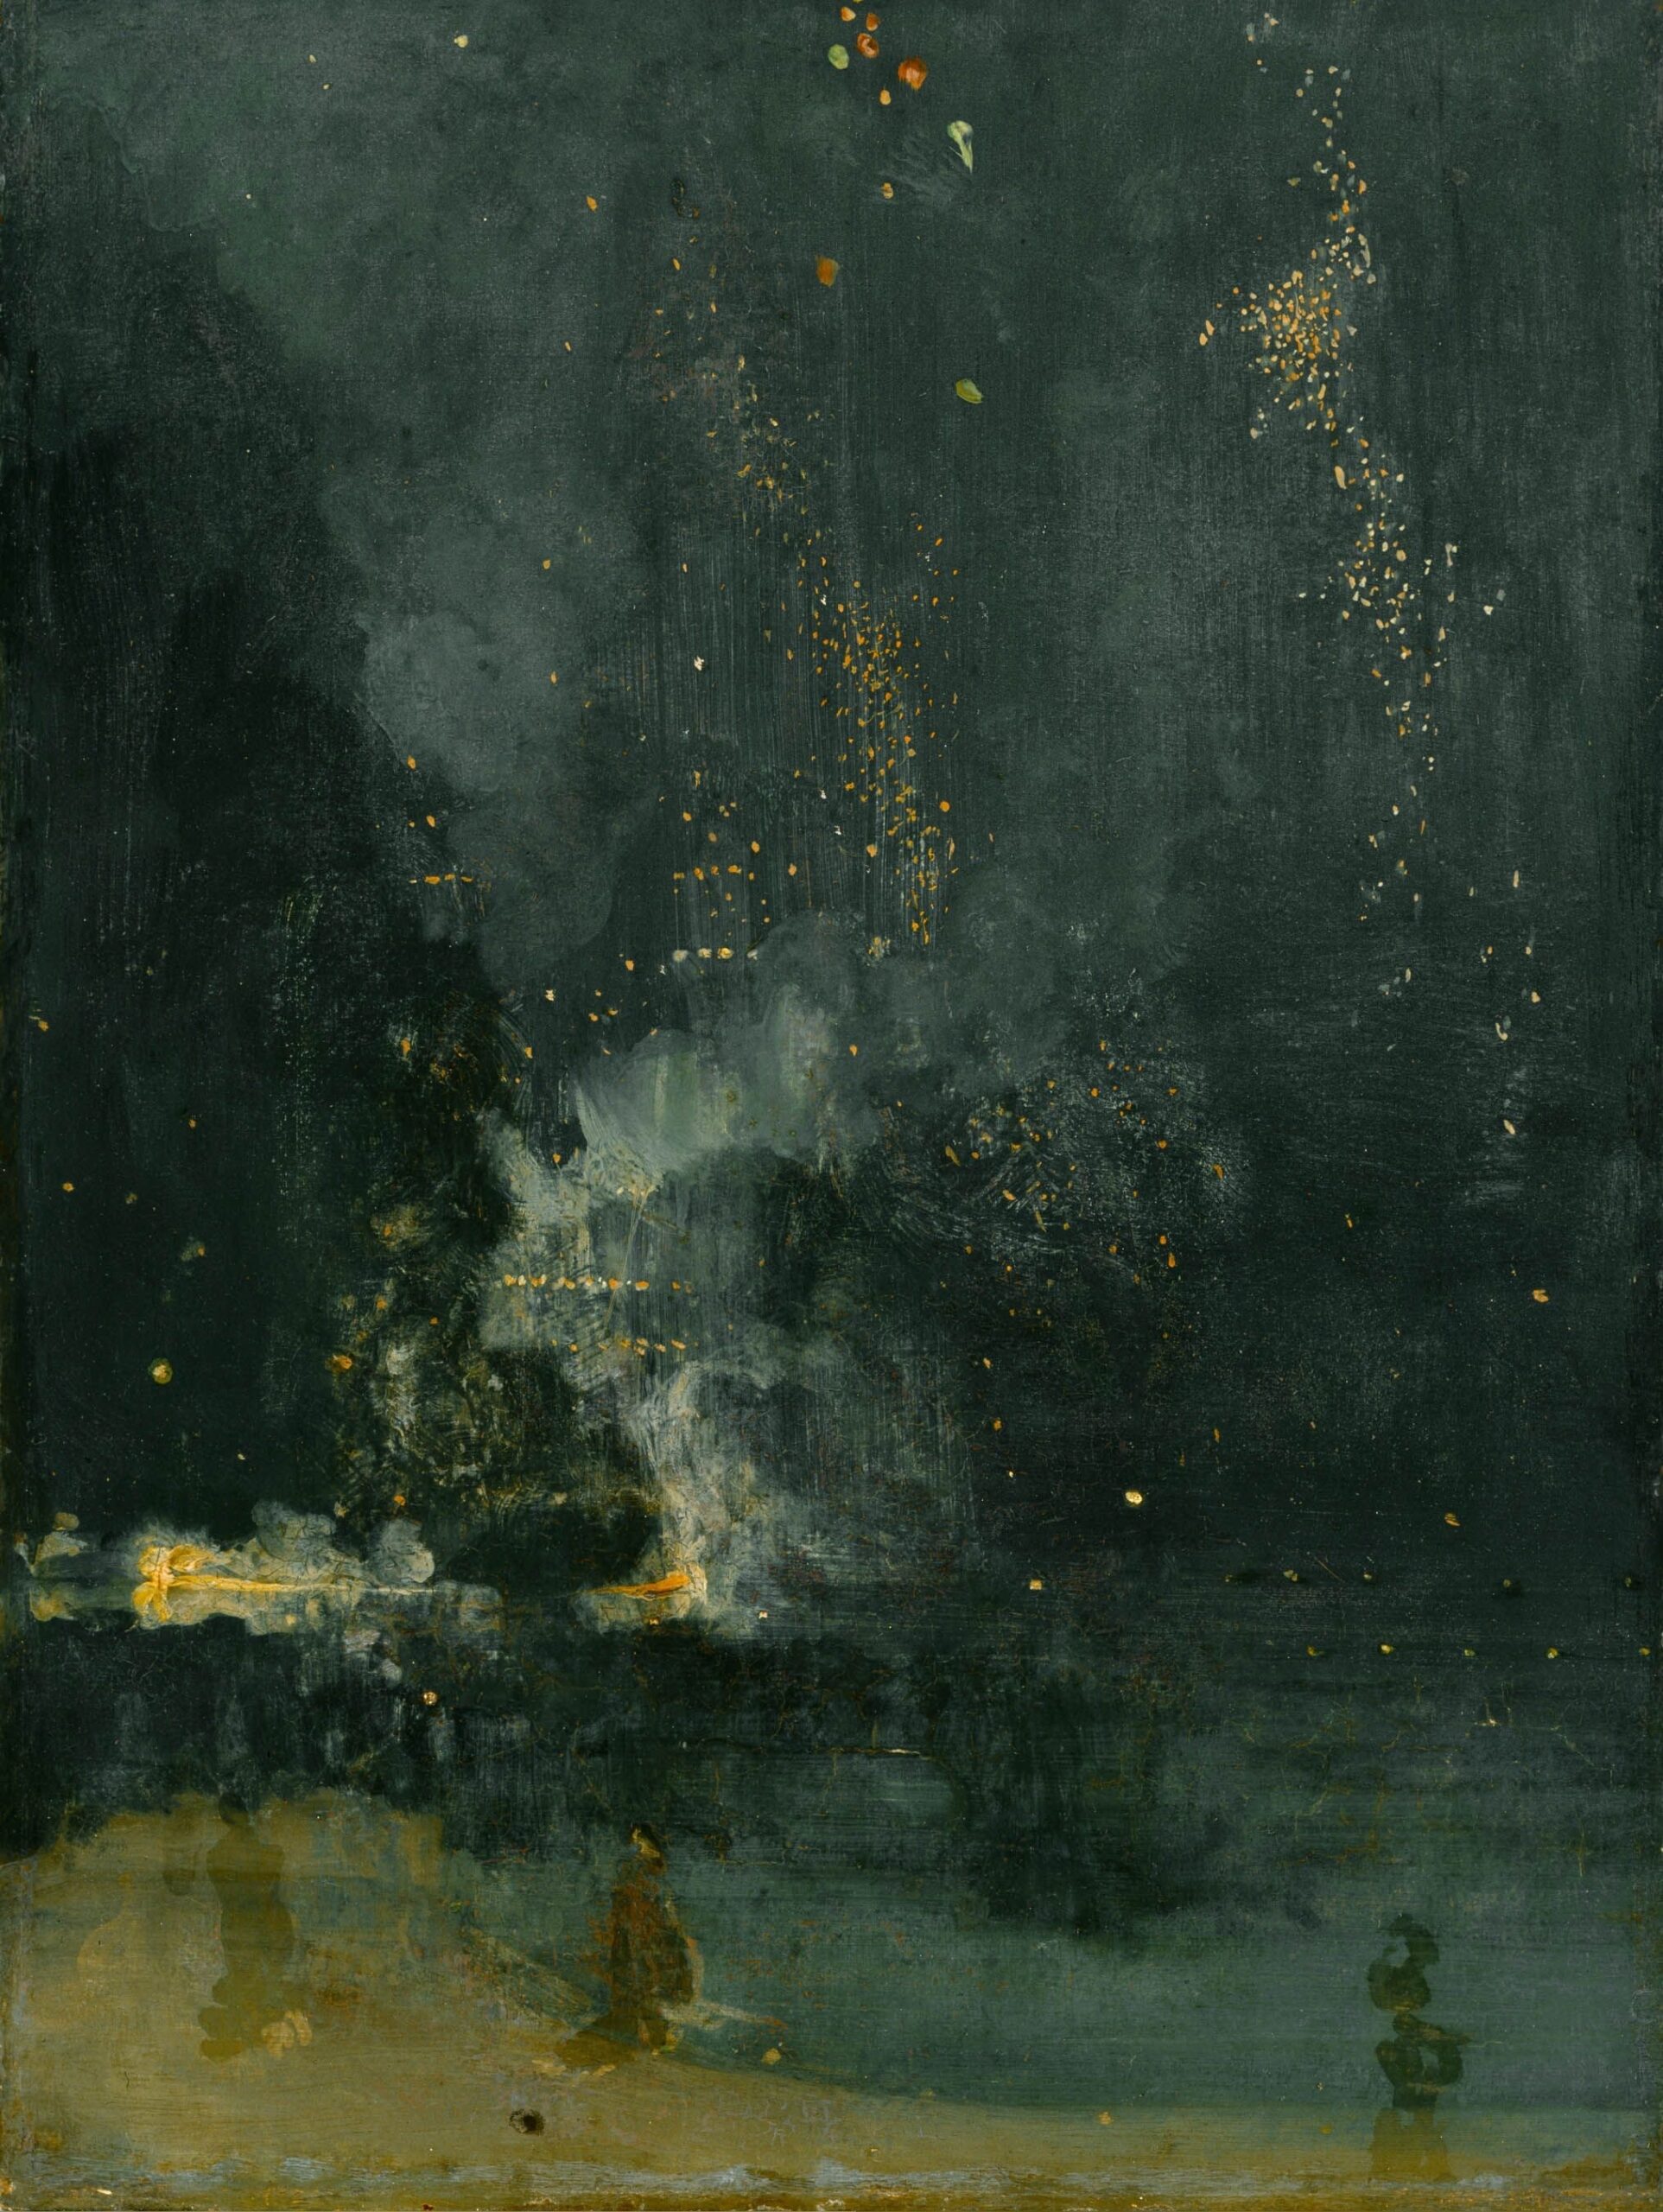 Whistler Nocturne in black and gold